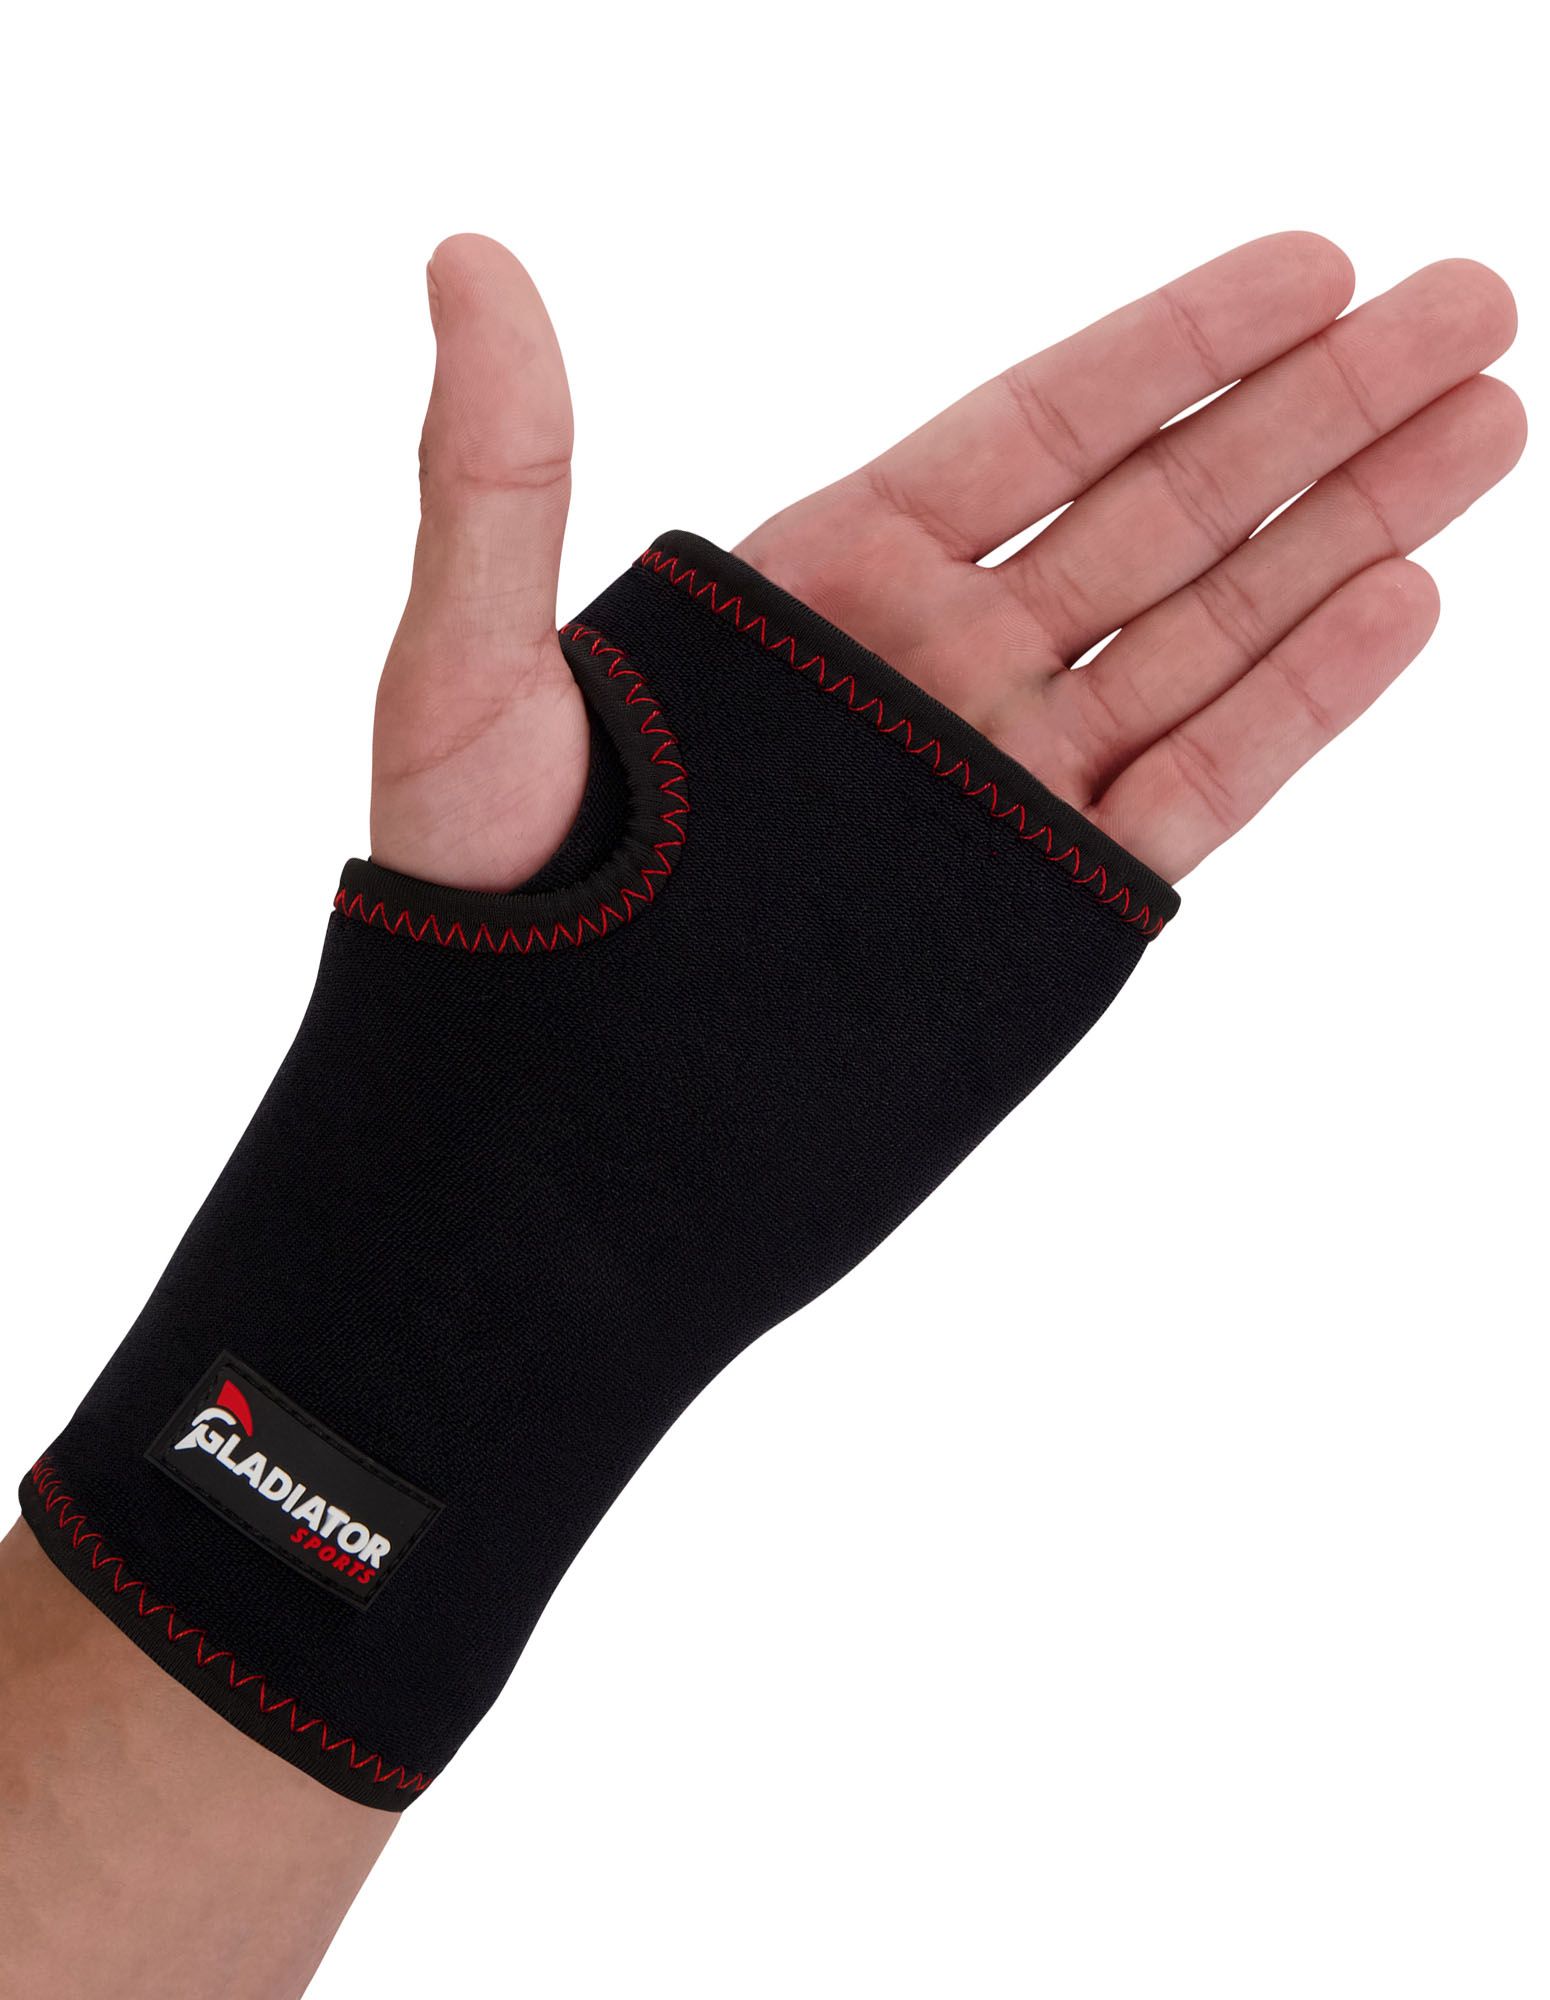 gladiator sports carpal tunnel syndrome wrist support for sale